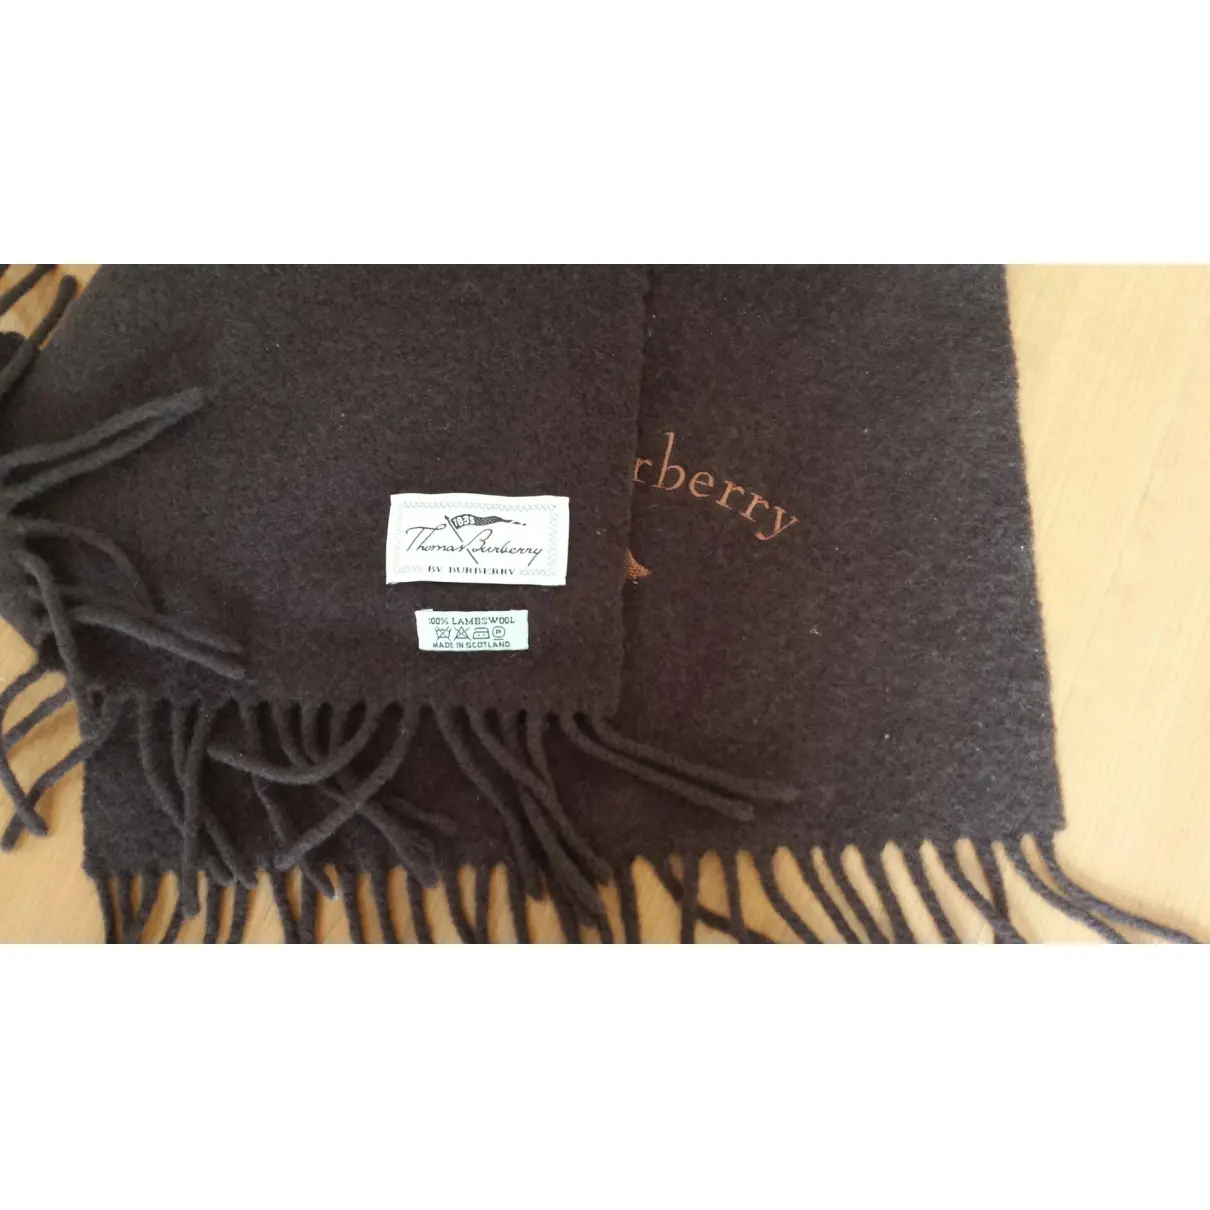 Burberry Wool scarf & pocket square for sale